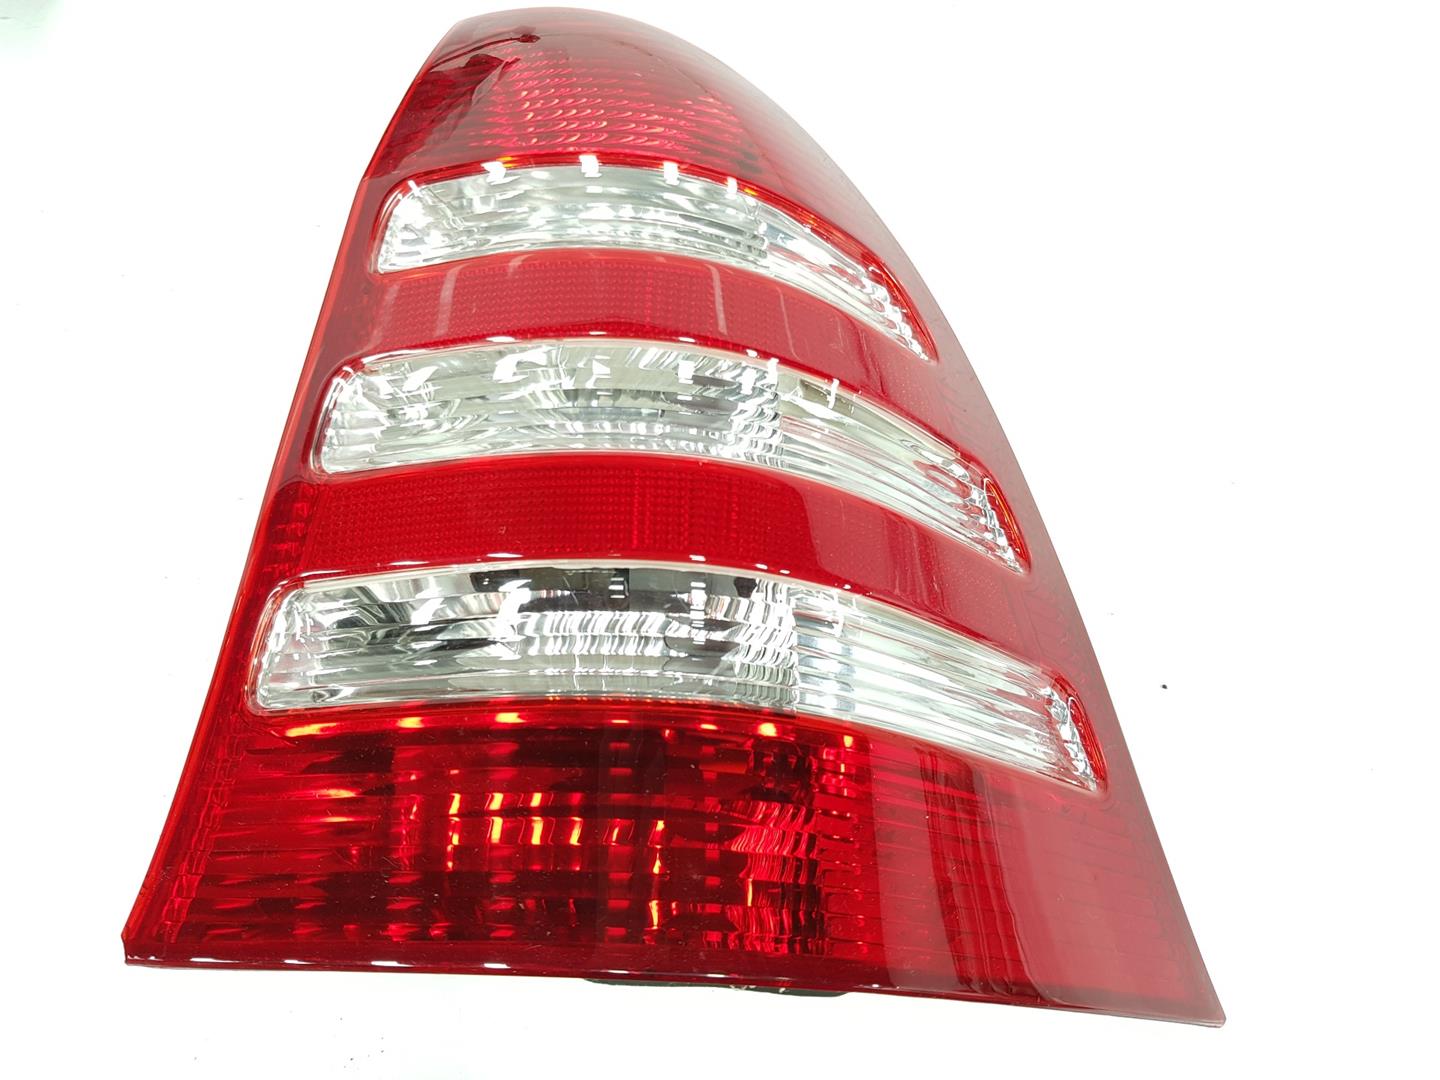 MERCEDES-BENZ C-Class W203/S203/CL203 (2000-2008) Rear Right Taillight Lamp 4401929R, DEPO084401929R 24223799